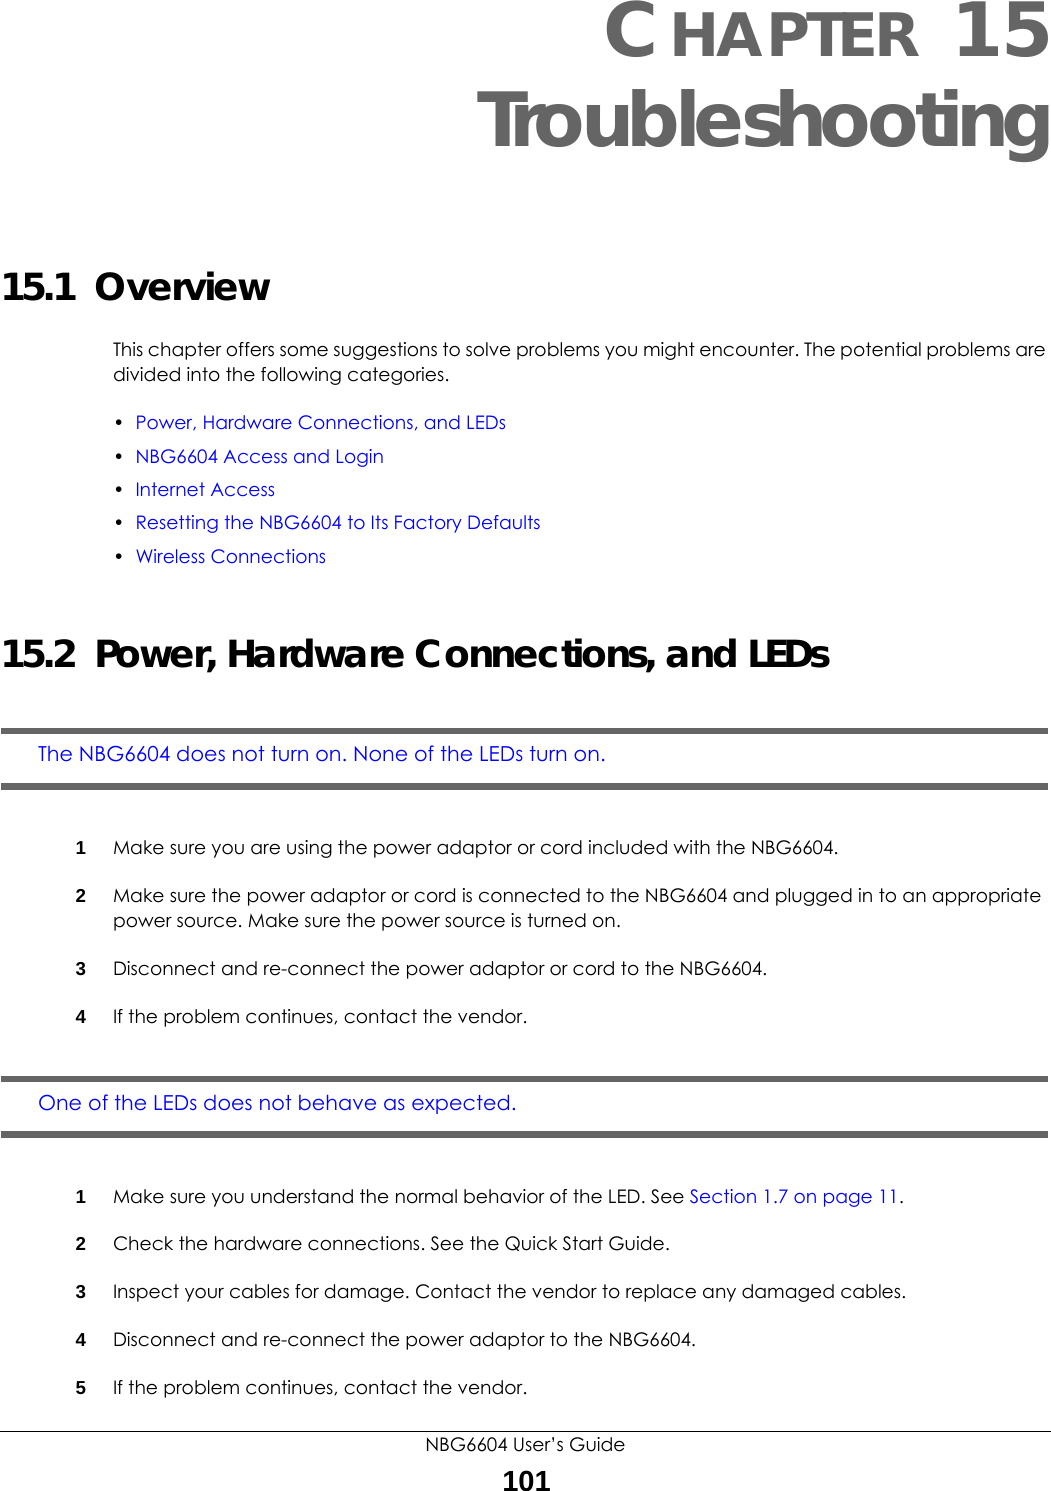 NBG6604 User’s Guide101CHAPTER 15 Troubleshooting15.1  OverviewThis chapter offers some suggestions to solve problems you might encounter. The potential problems are divided into the following categories. •Power, Hardware Connections, and LEDs•NBG6604 Access and Login•Internet Access•Resetting the NBG6604 to Its Factory Defaults•Wireless Connections15.2  Power, Hardware Connections, and LEDsThe NBG6604 does not turn on. None of the LEDs turn on.1Make sure you are using the power adaptor or cord included with the NBG6604.2Make sure the power adaptor or cord is connected to the NBG6604 and plugged in to an appropriate power source. Make sure the power source is turned on.3Disconnect and re-connect the power adaptor or cord to the NBG6604.4If the problem continues, contact the vendor.One of the LEDs does not behave as expected.1Make sure you understand the normal behavior of the LED. See Section 1.7 on page 11.2Check the hardware connections. See the Quick Start Guide. 3Inspect your cables for damage. Contact the vendor to replace any damaged cables.4Disconnect and re-connect the power adaptor to the NBG6604. 5If the problem continues, contact the vendor.